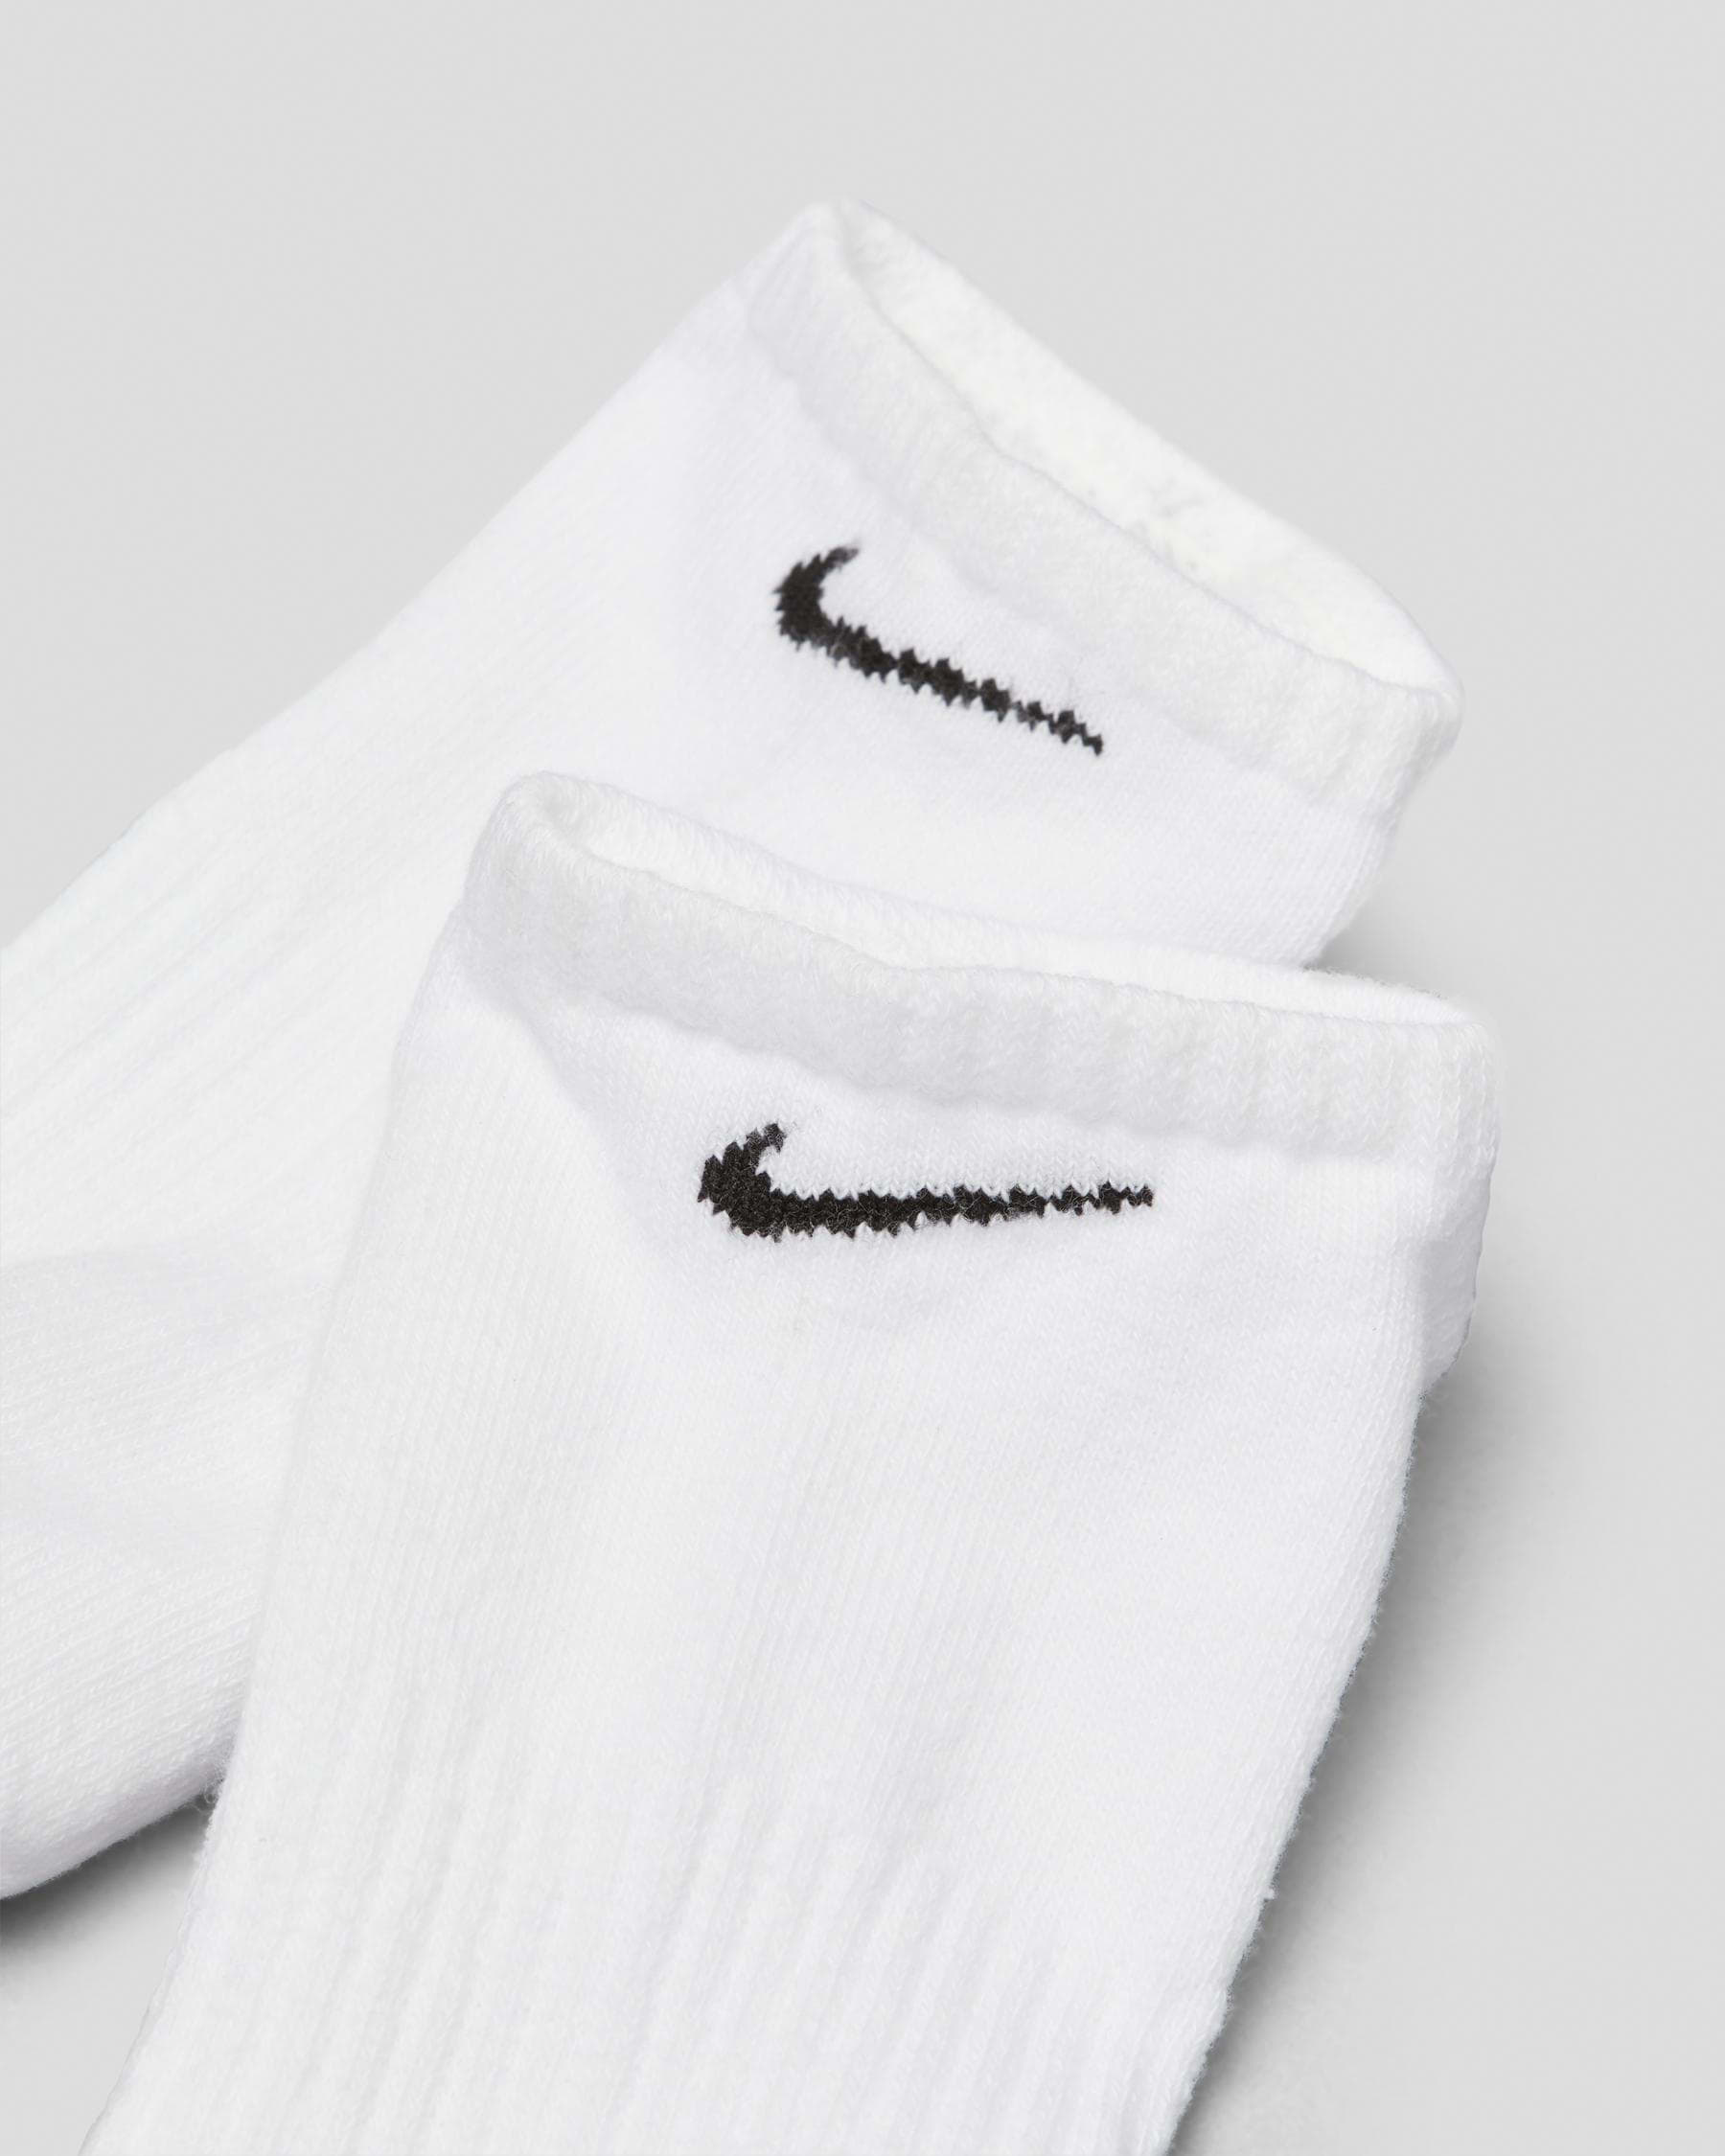 Shop Nike Everyday Cushioned No Show Socks 3 Pack In White/black - Fast ...